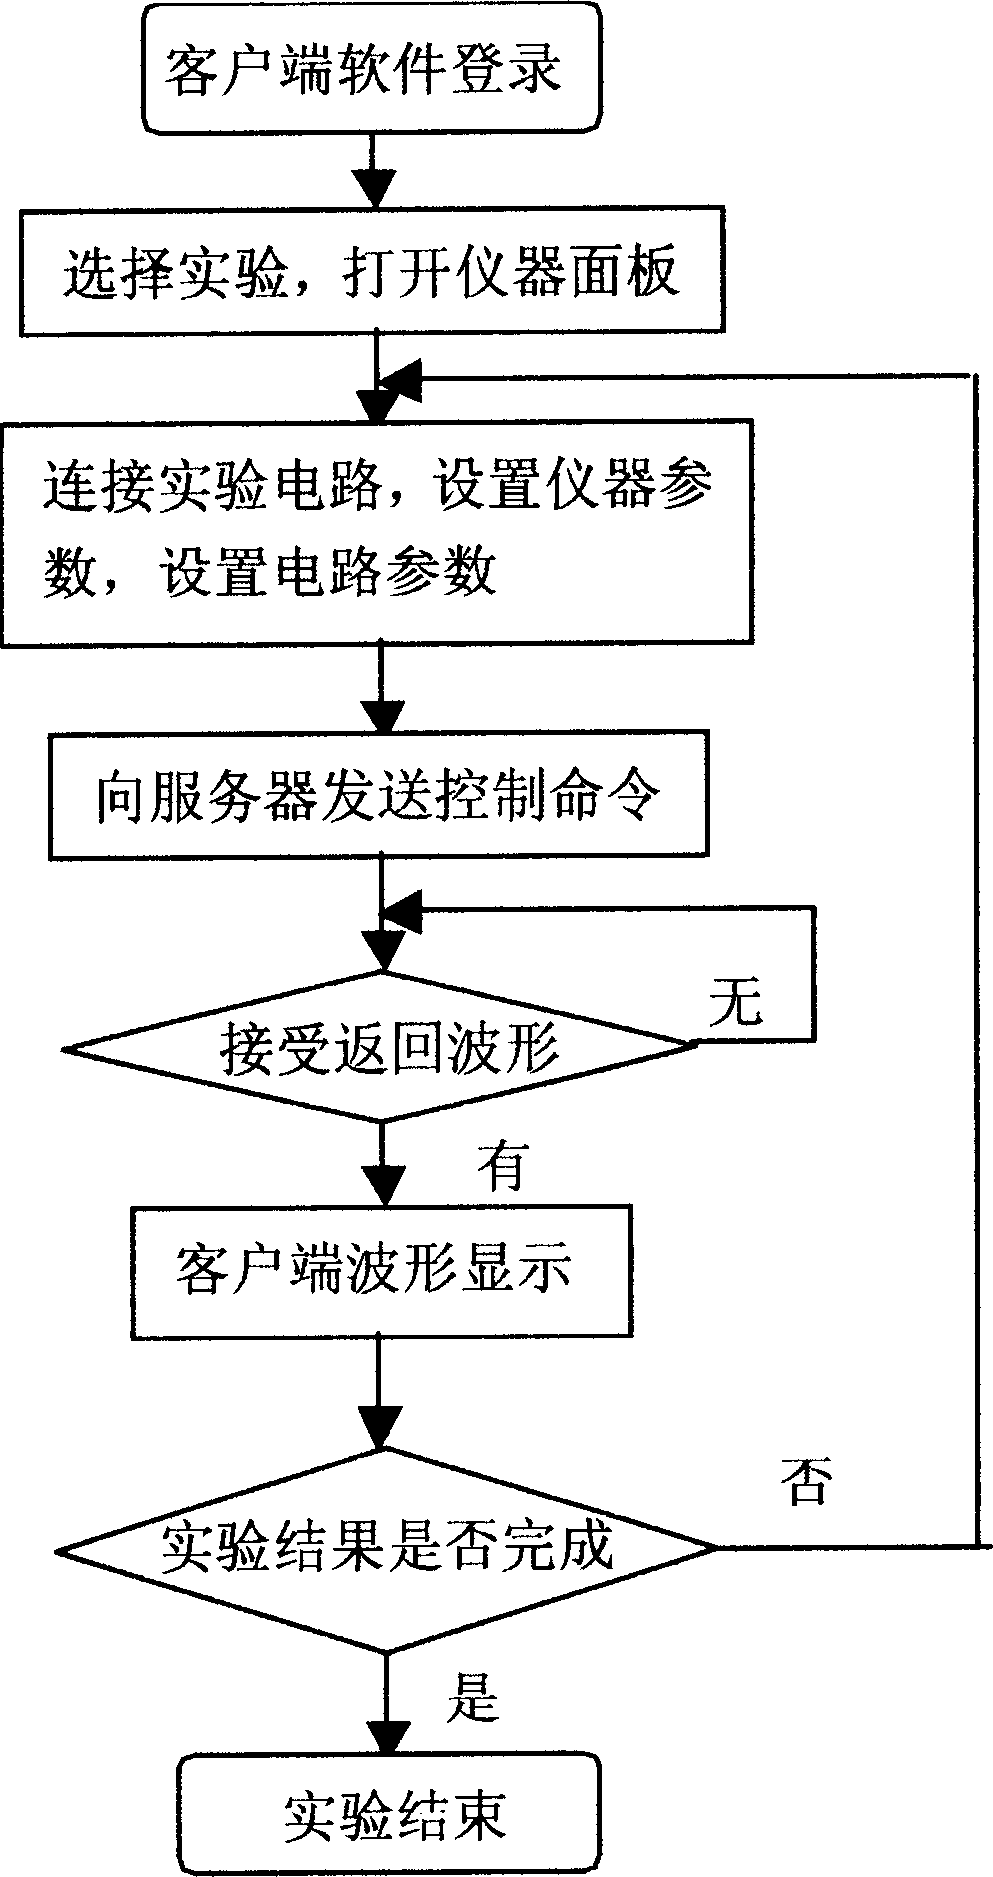 Network-based remote electronic circuit experimental method and system